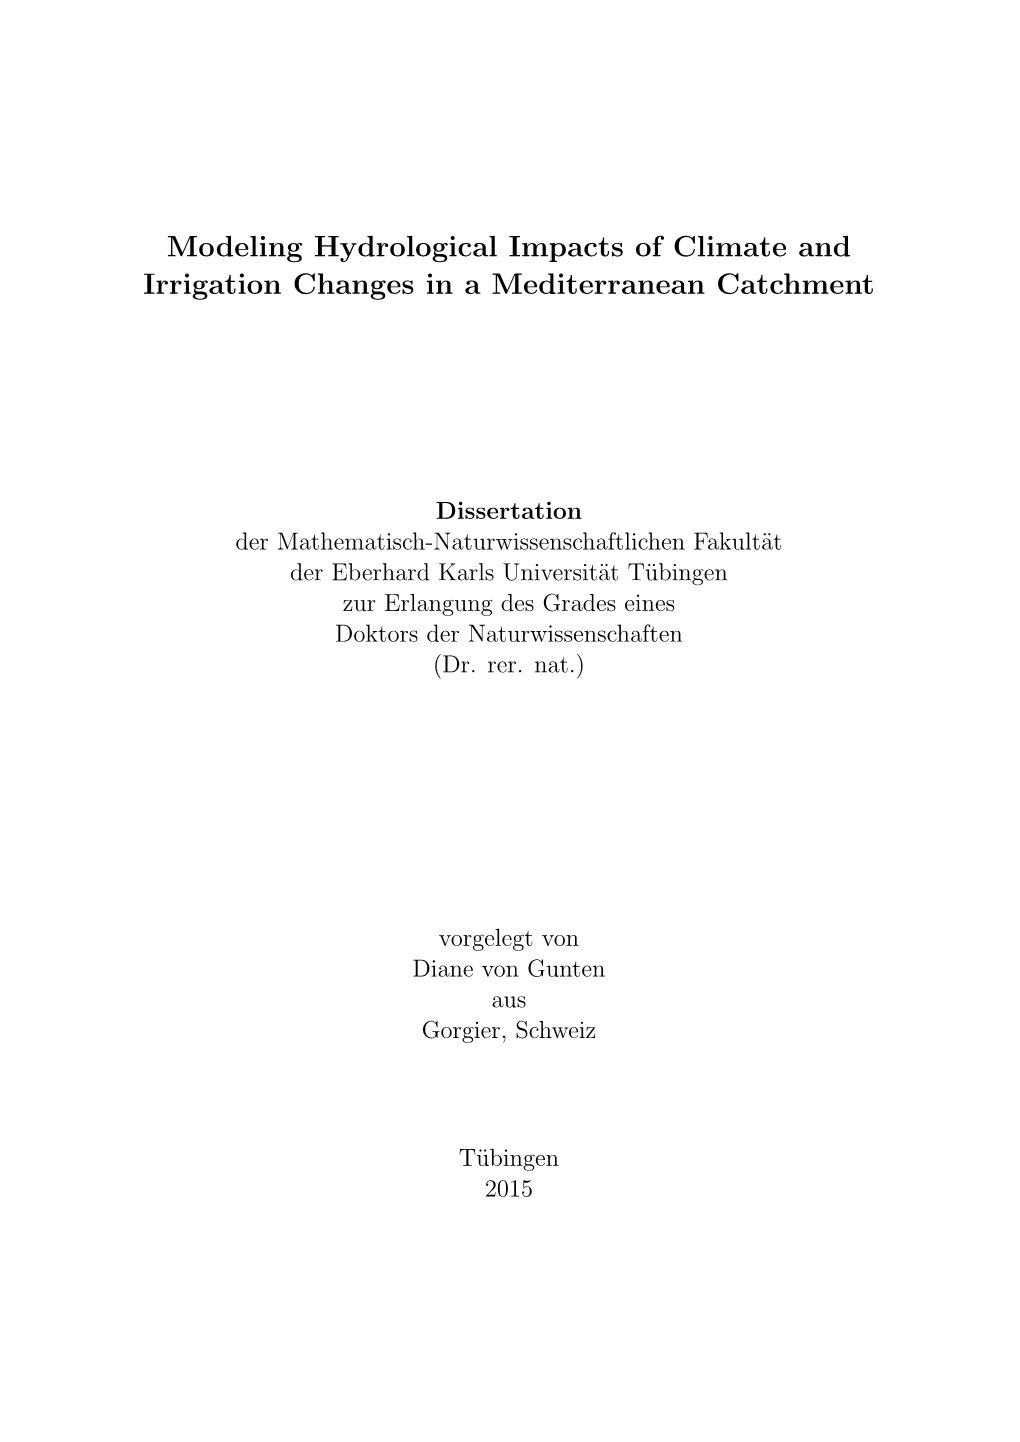 Modeling Hydrological Impacts of Climate and Irrigation Changes in a Mediterranean Catchment